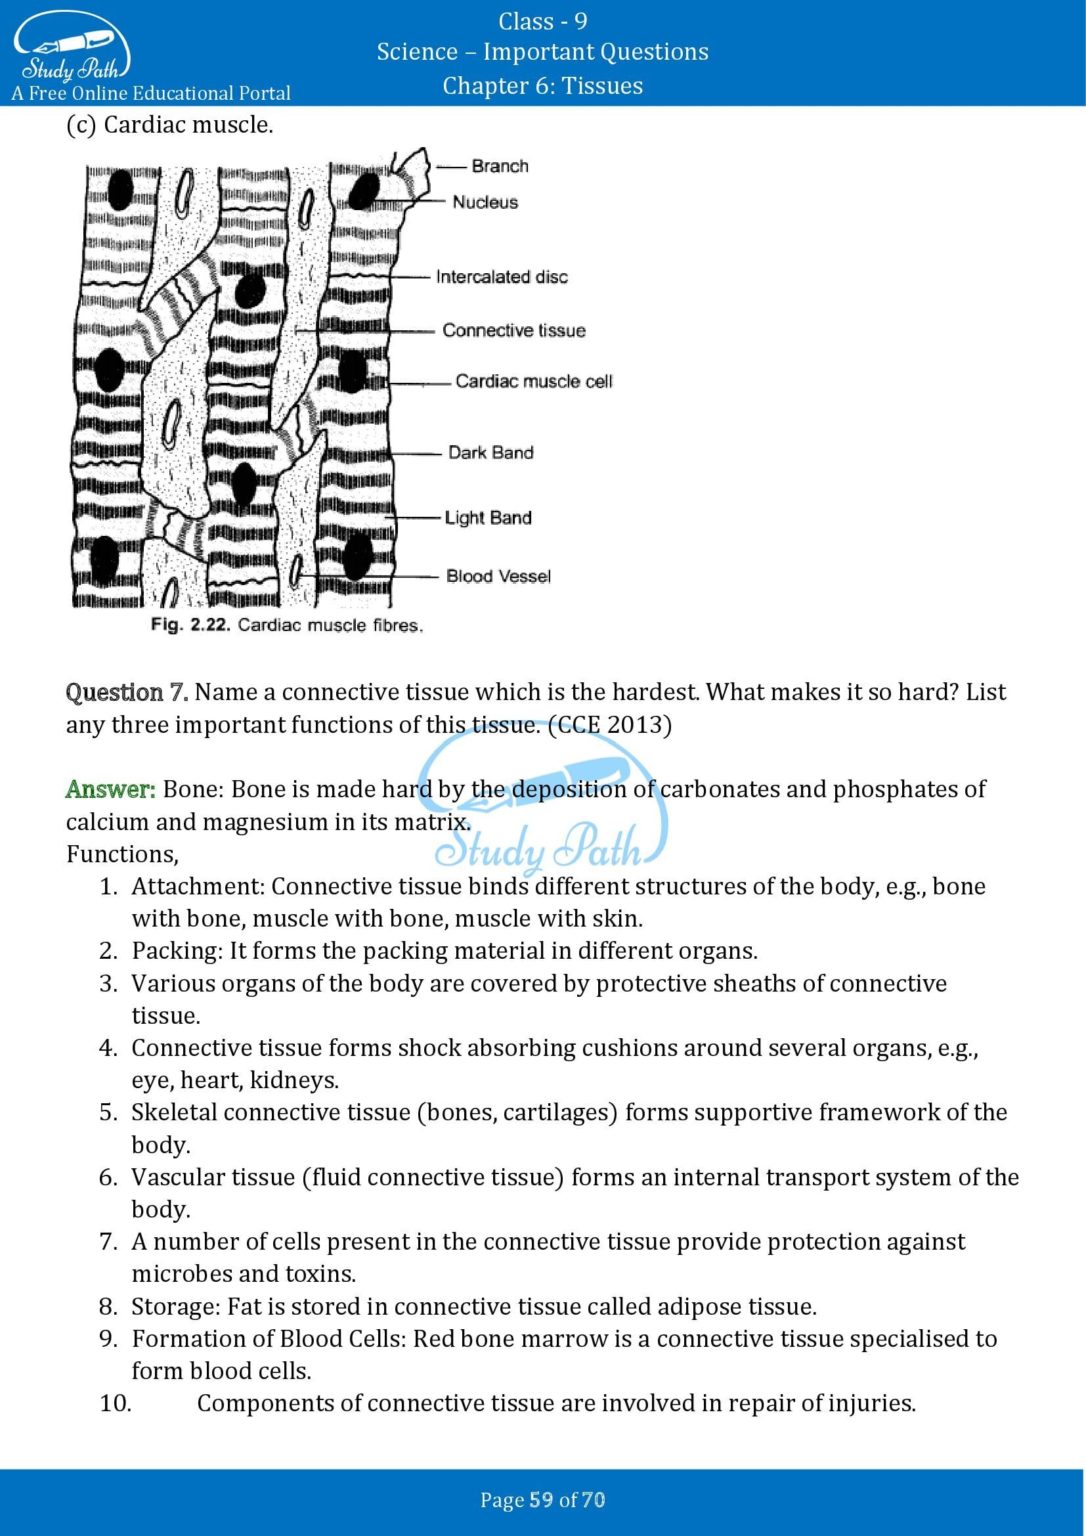 class 9 science tissues case study questions